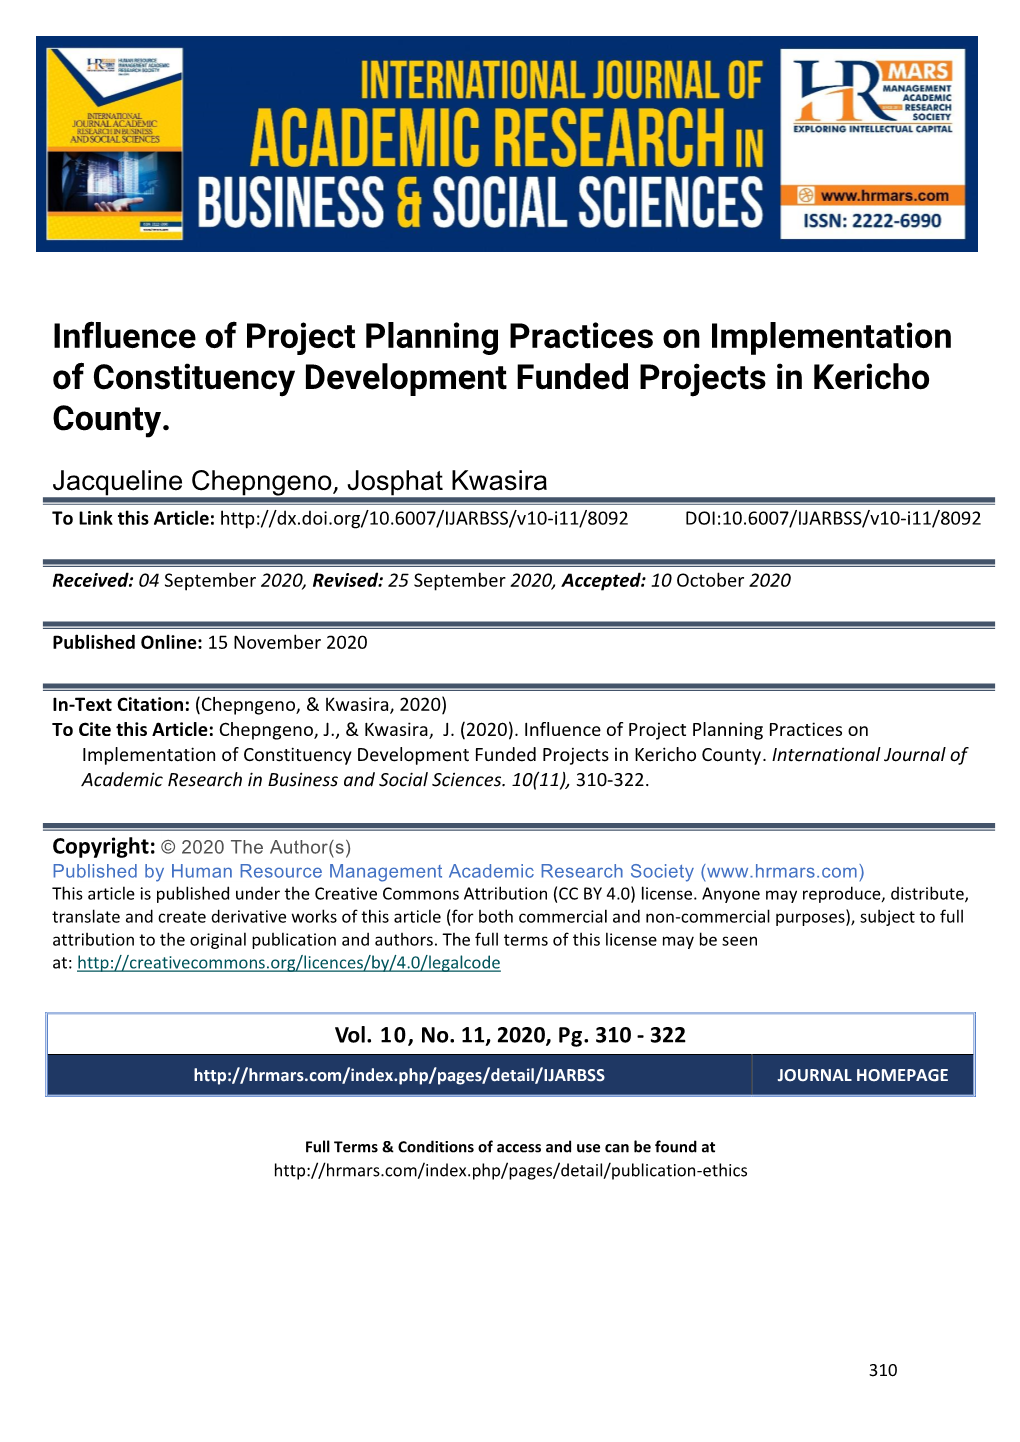 Influence of Project Planning Practices on Implementation of Constituency Development Funded Projects in Kericho County